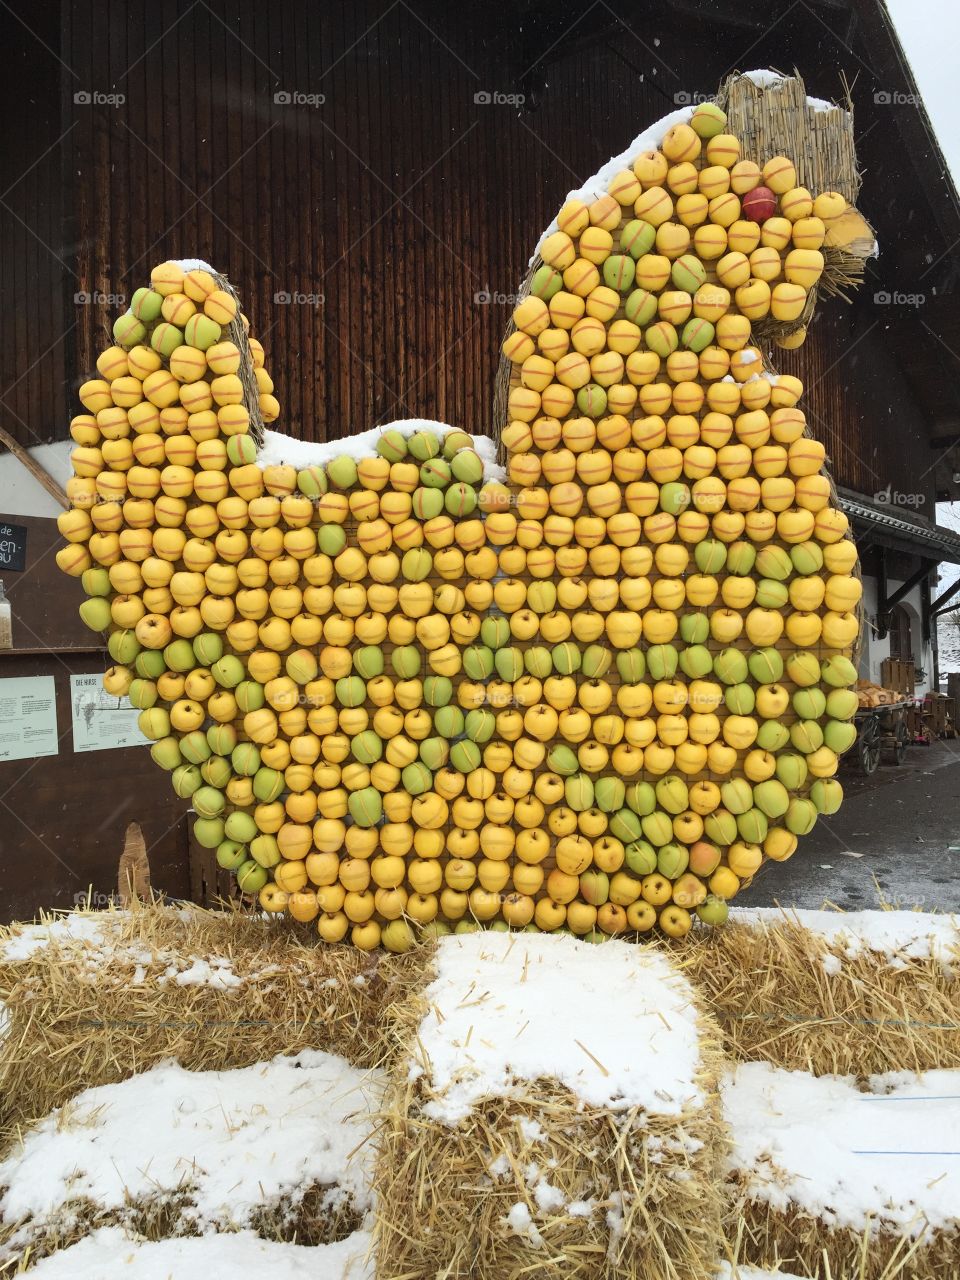 Huge hen made of apples and straw - sculpture made by an organic Farm house 